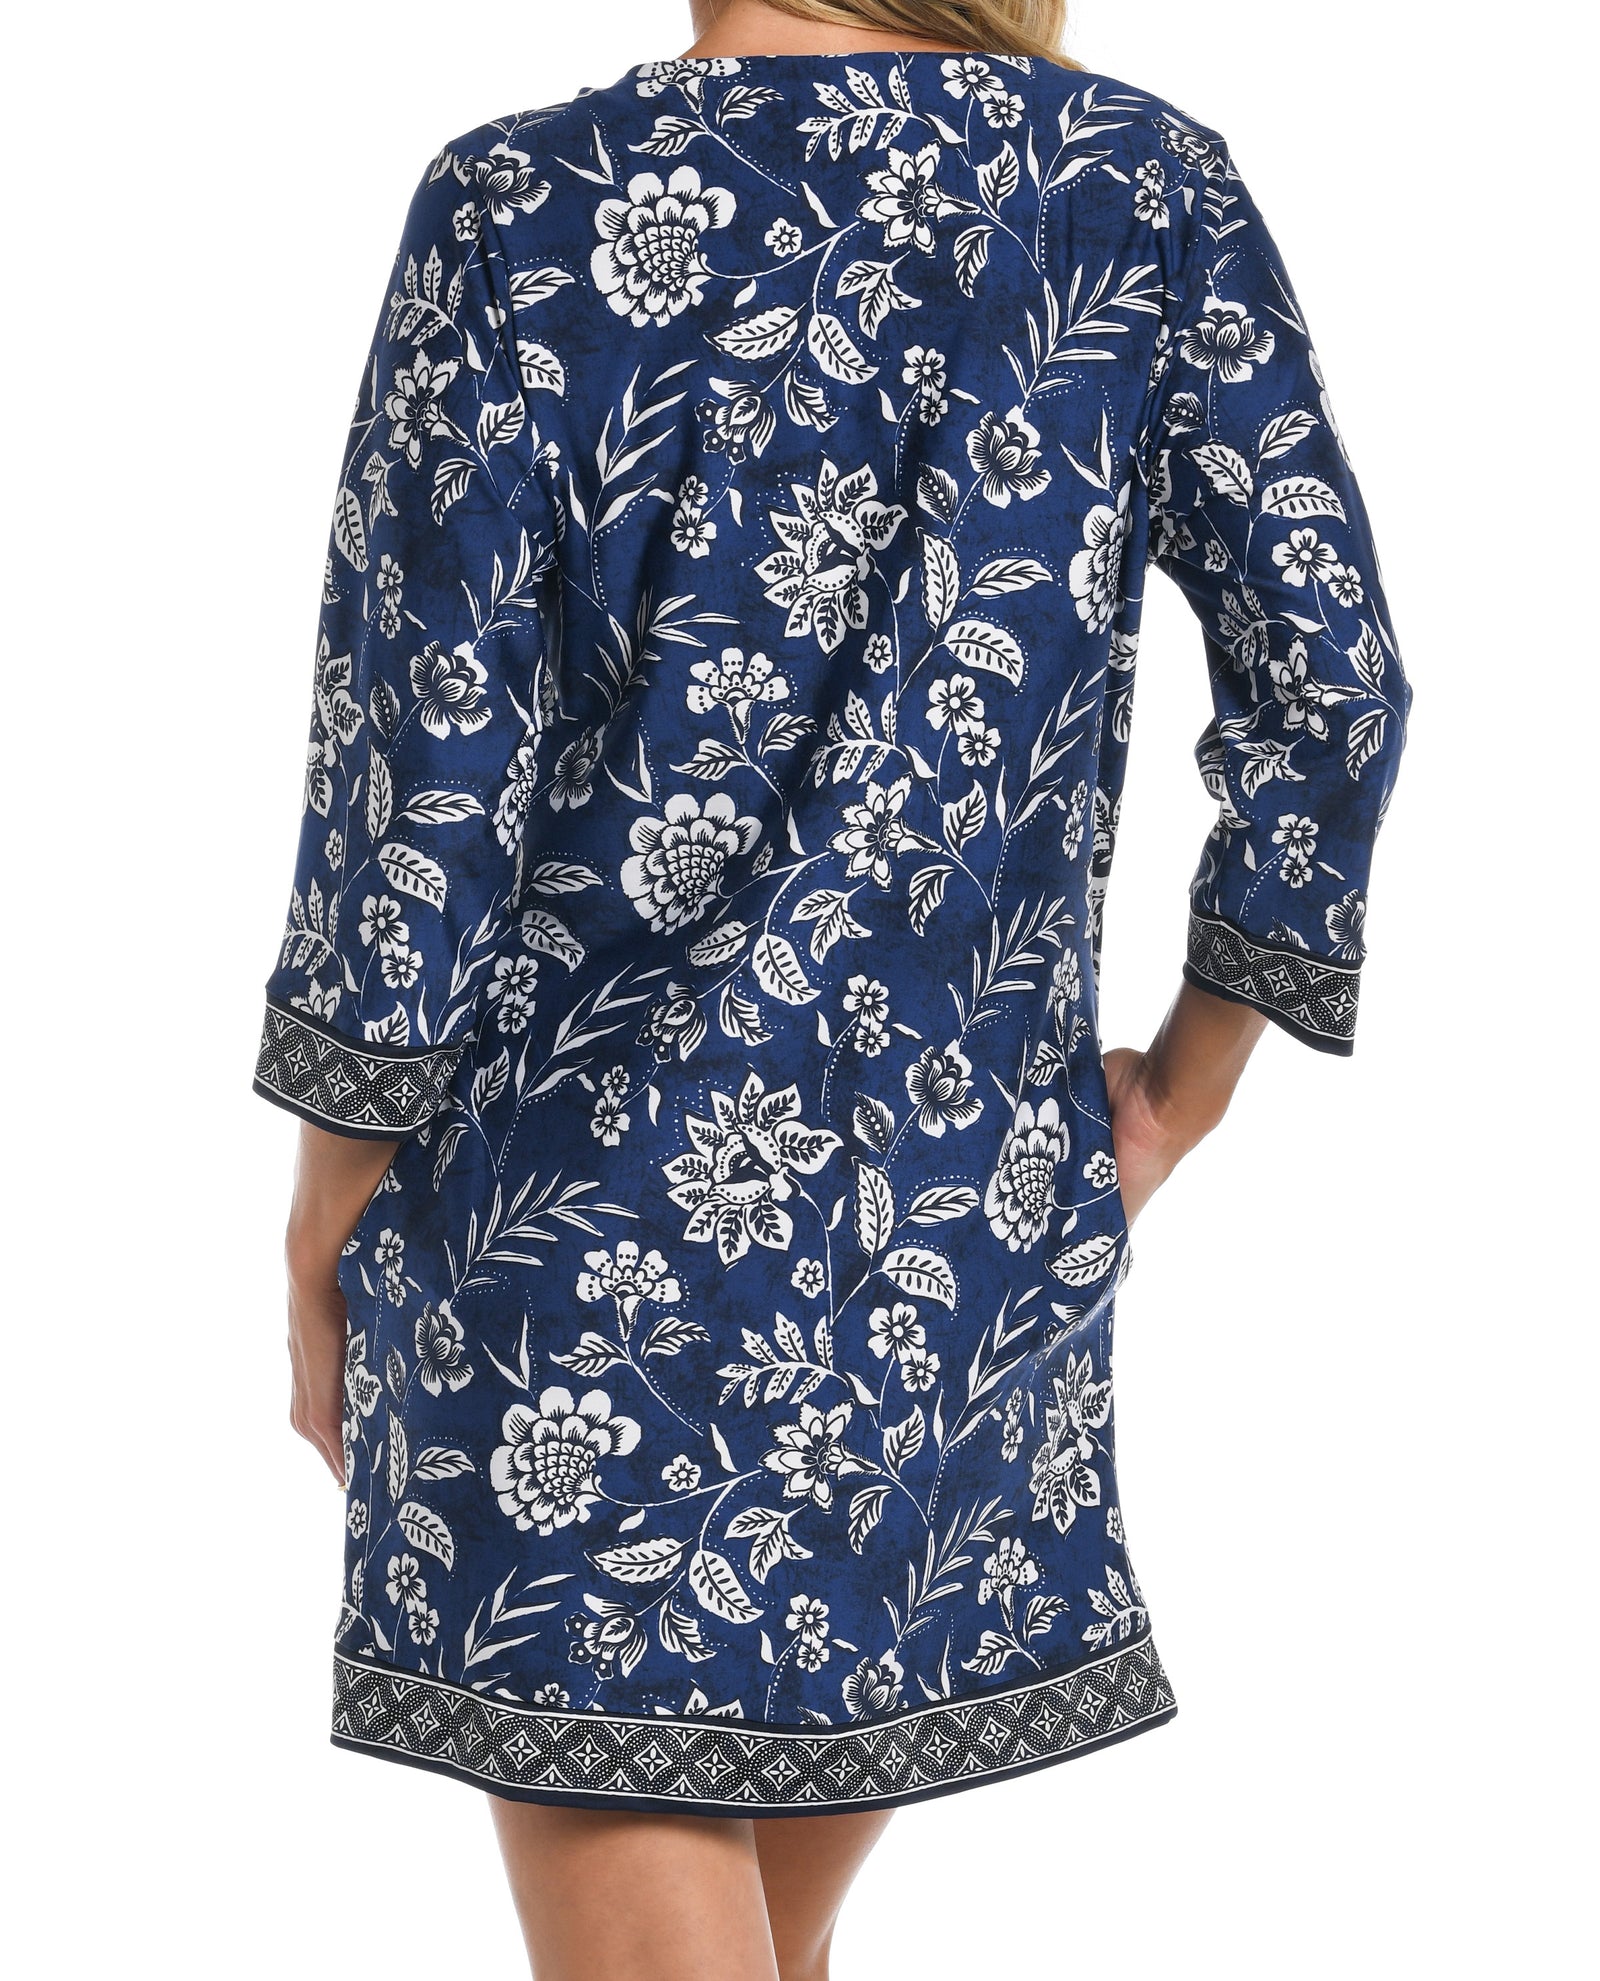 BALI BATIK COLLECTION: 24TH & OCEAN   Shift Dress With Pockets   Fabric Content: 85% Nylon 15% Elastane   Product#: TF3DN11